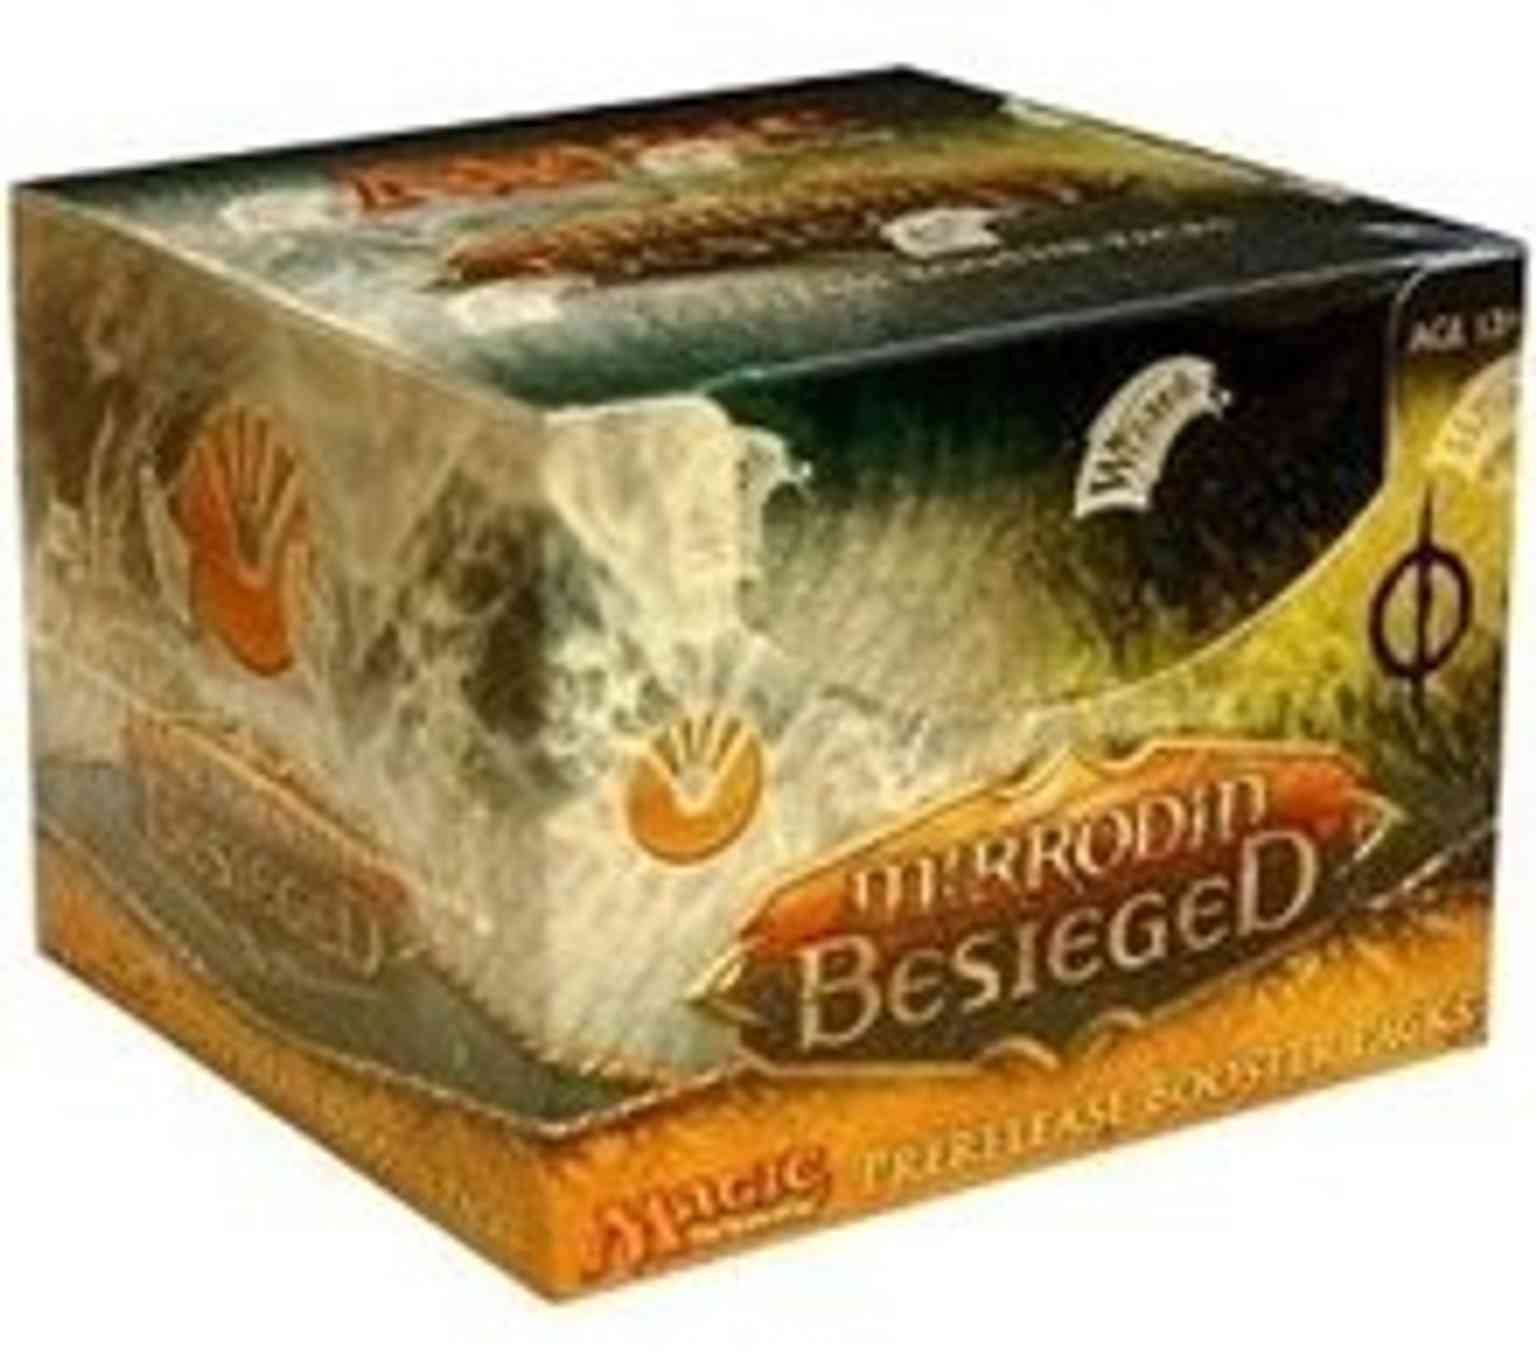 Mirrodin Beseiged Prerelease Box magic card front